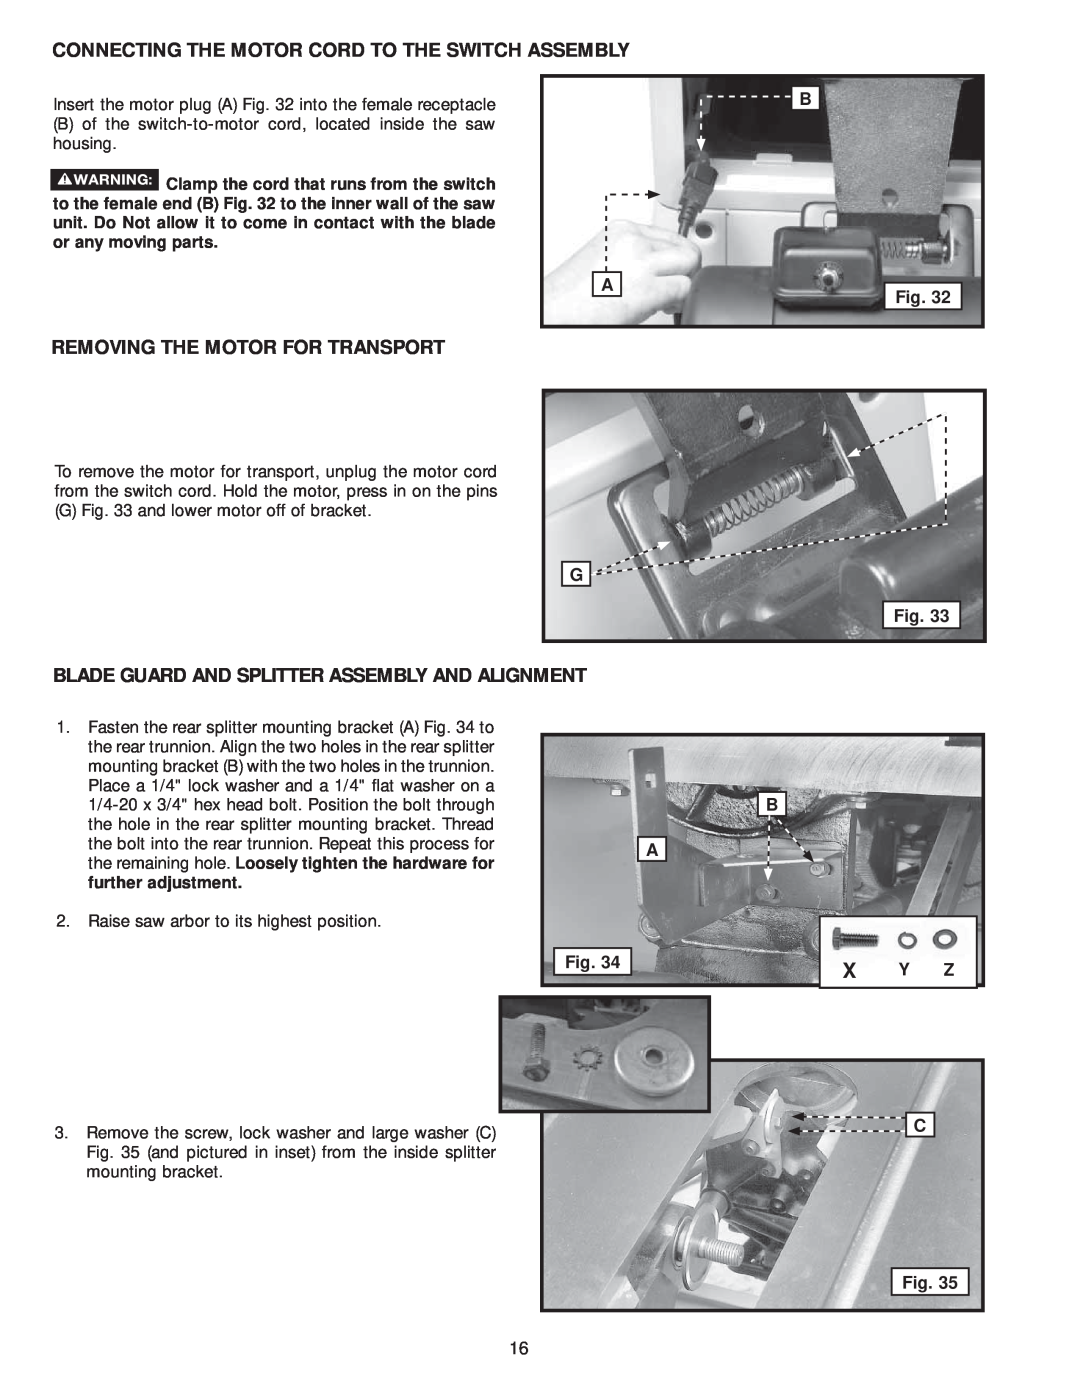 Delta 36-979, 36-978 instruction manual Connecting The Motor Cord To The Switch Assembly, Removing The Motor For Transport 